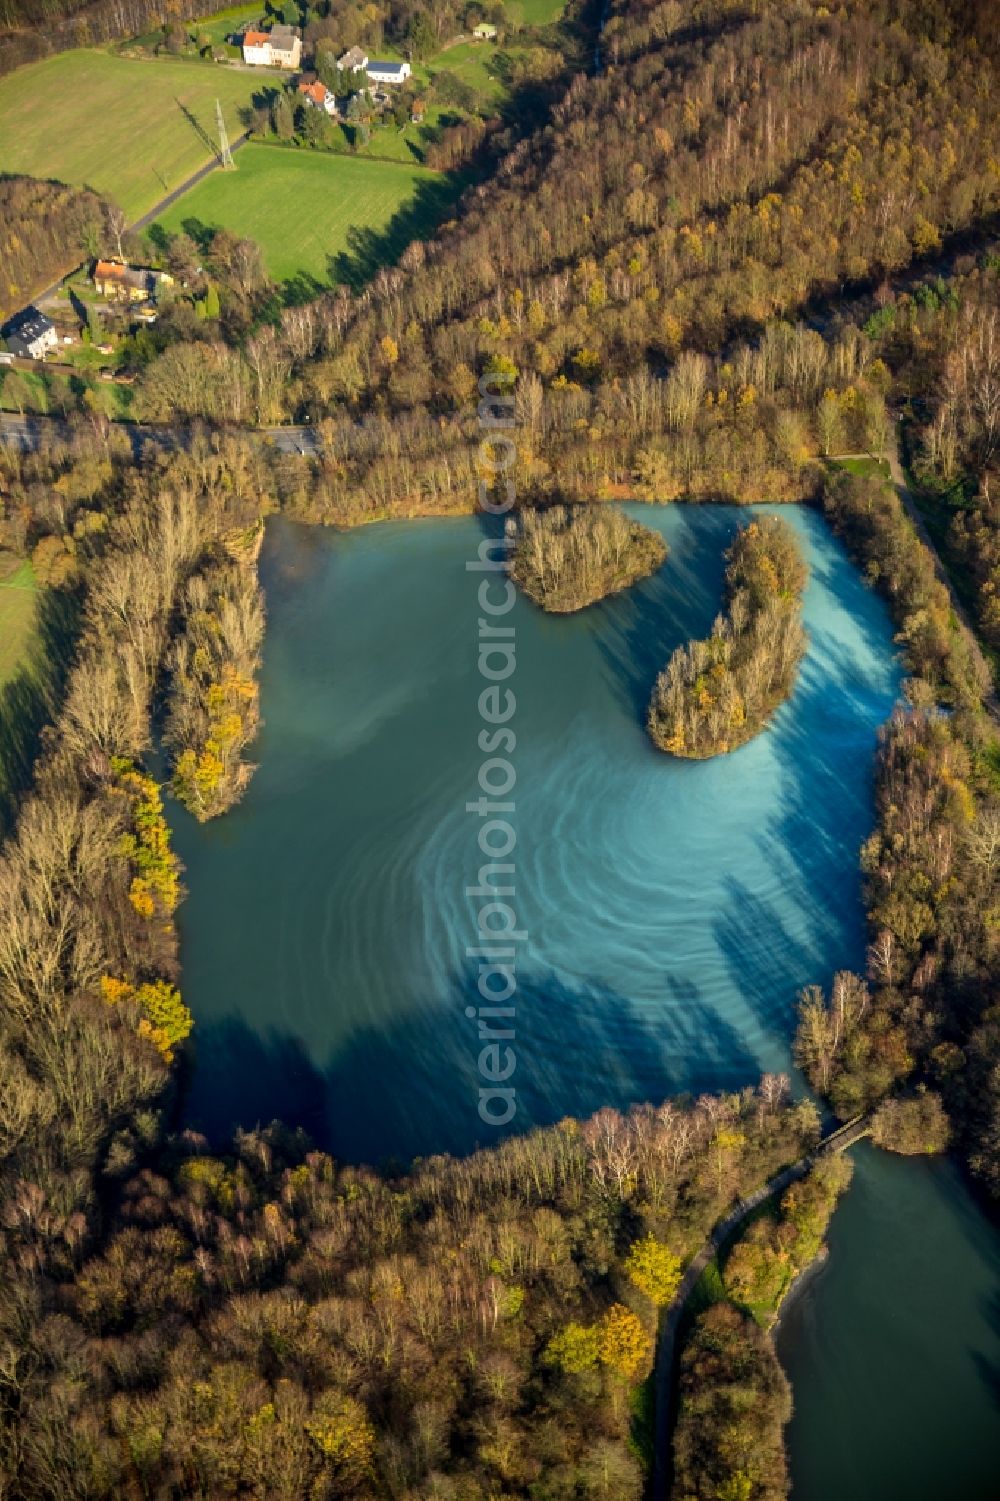 Aerial image Bochum - Autumnal Harpener Pond in a forest in the East of Bochum in the state of North Rhine-Westphalia. Small wooded islands are located in the grey bluish water